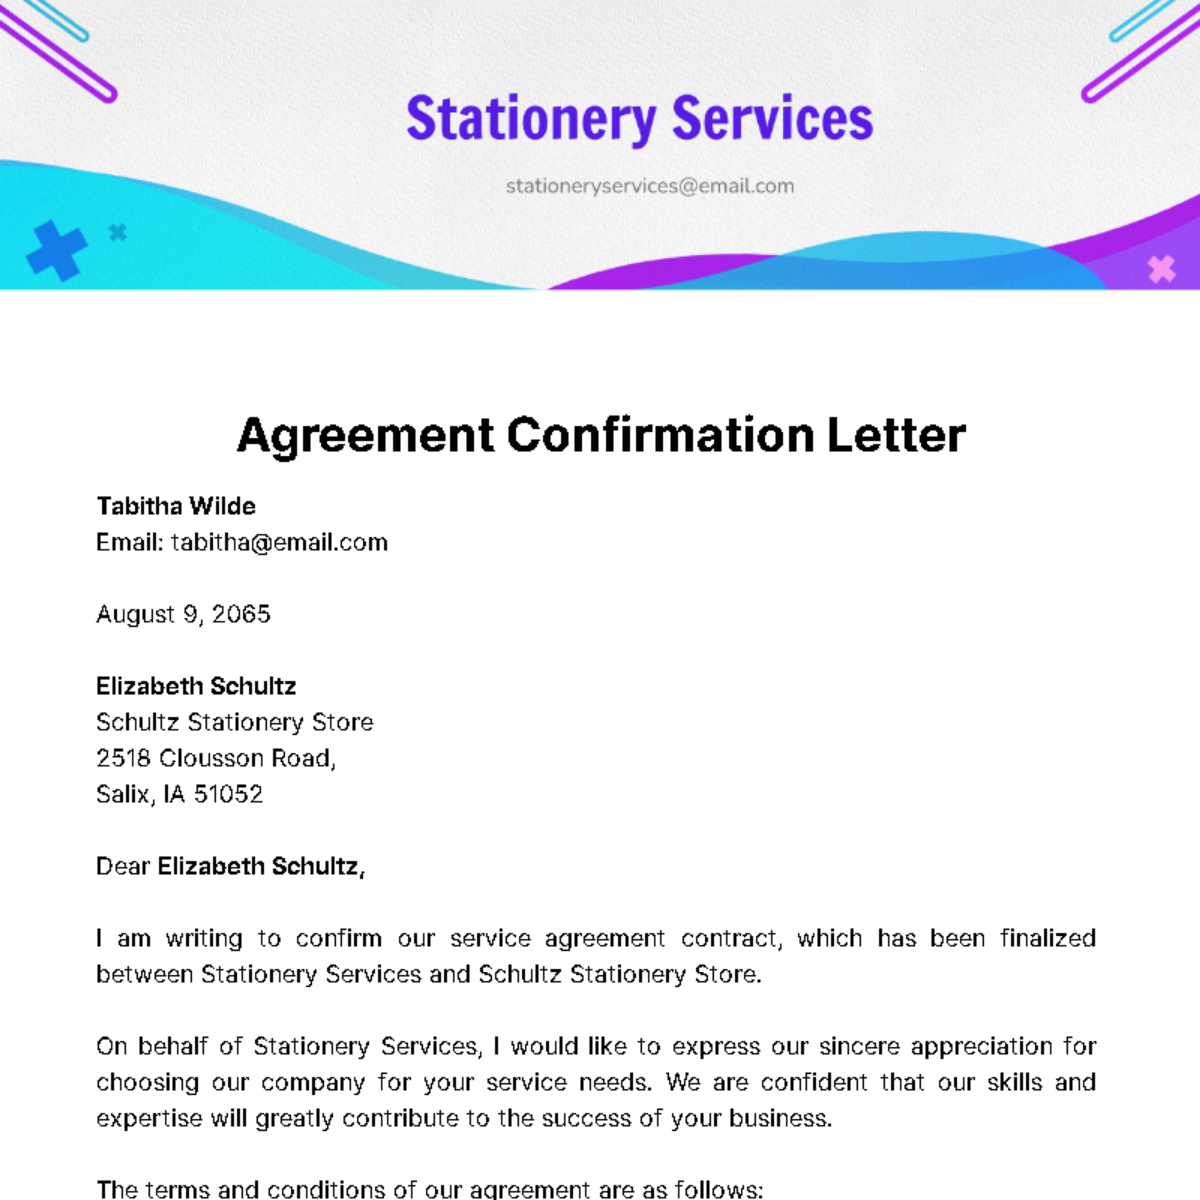 Agreement Confirmation Letter Template